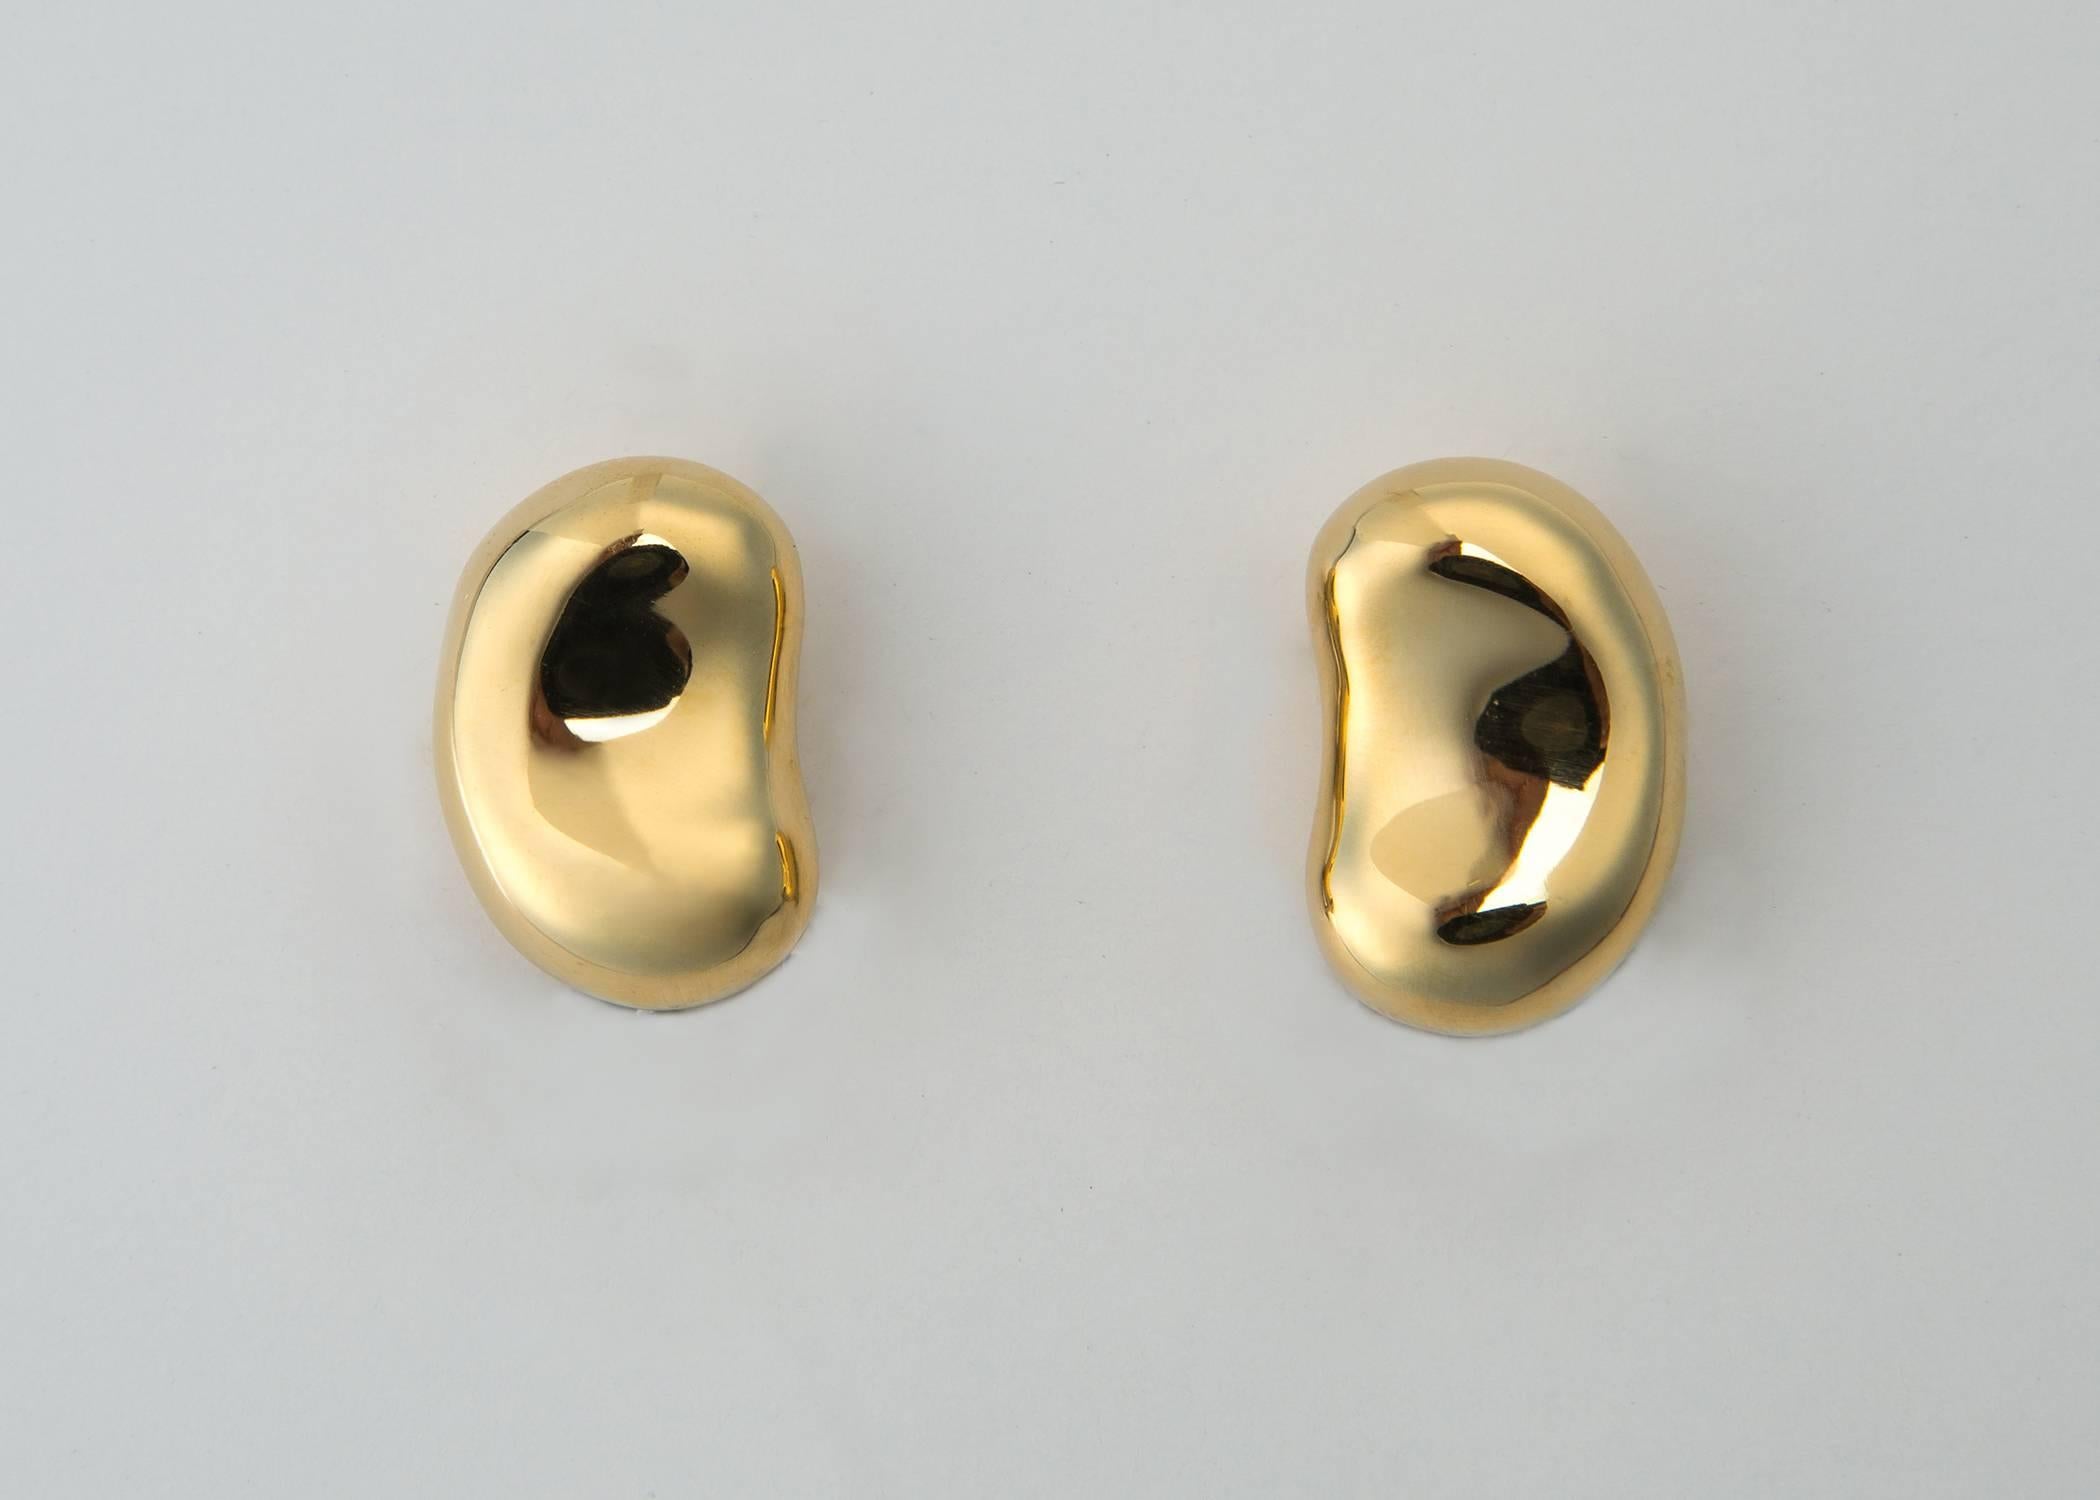 Elsa Peretti's soft organic bean collection is simply iconic. 7/8's of an inch in size. 21 x 14 mm